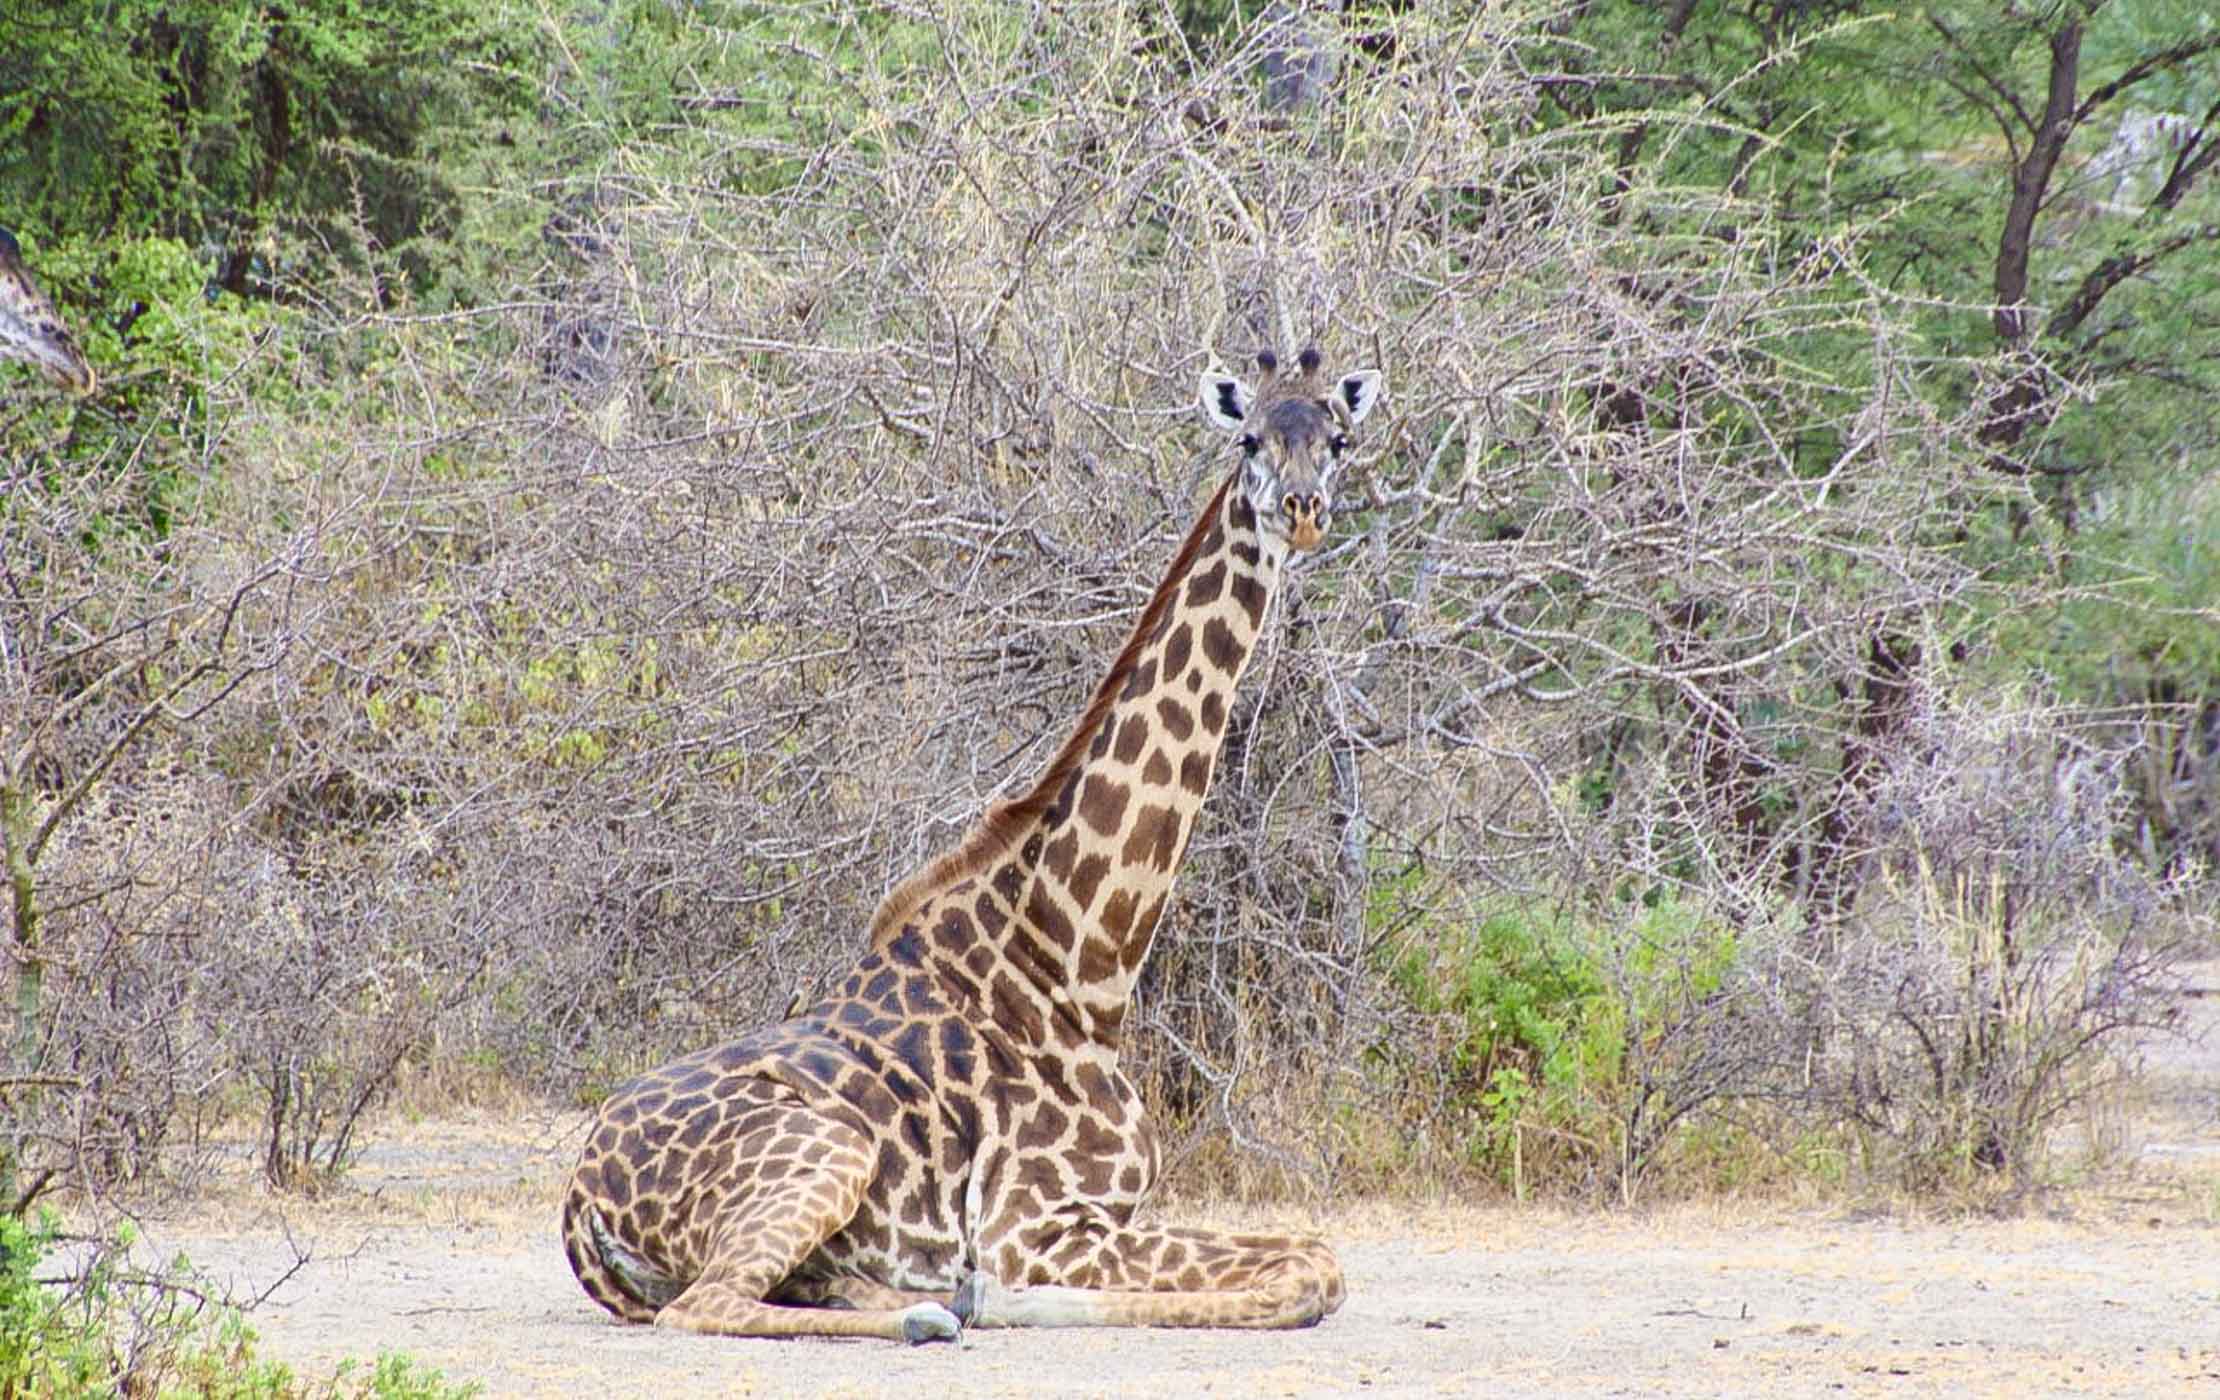 A giraffe sits on the ground